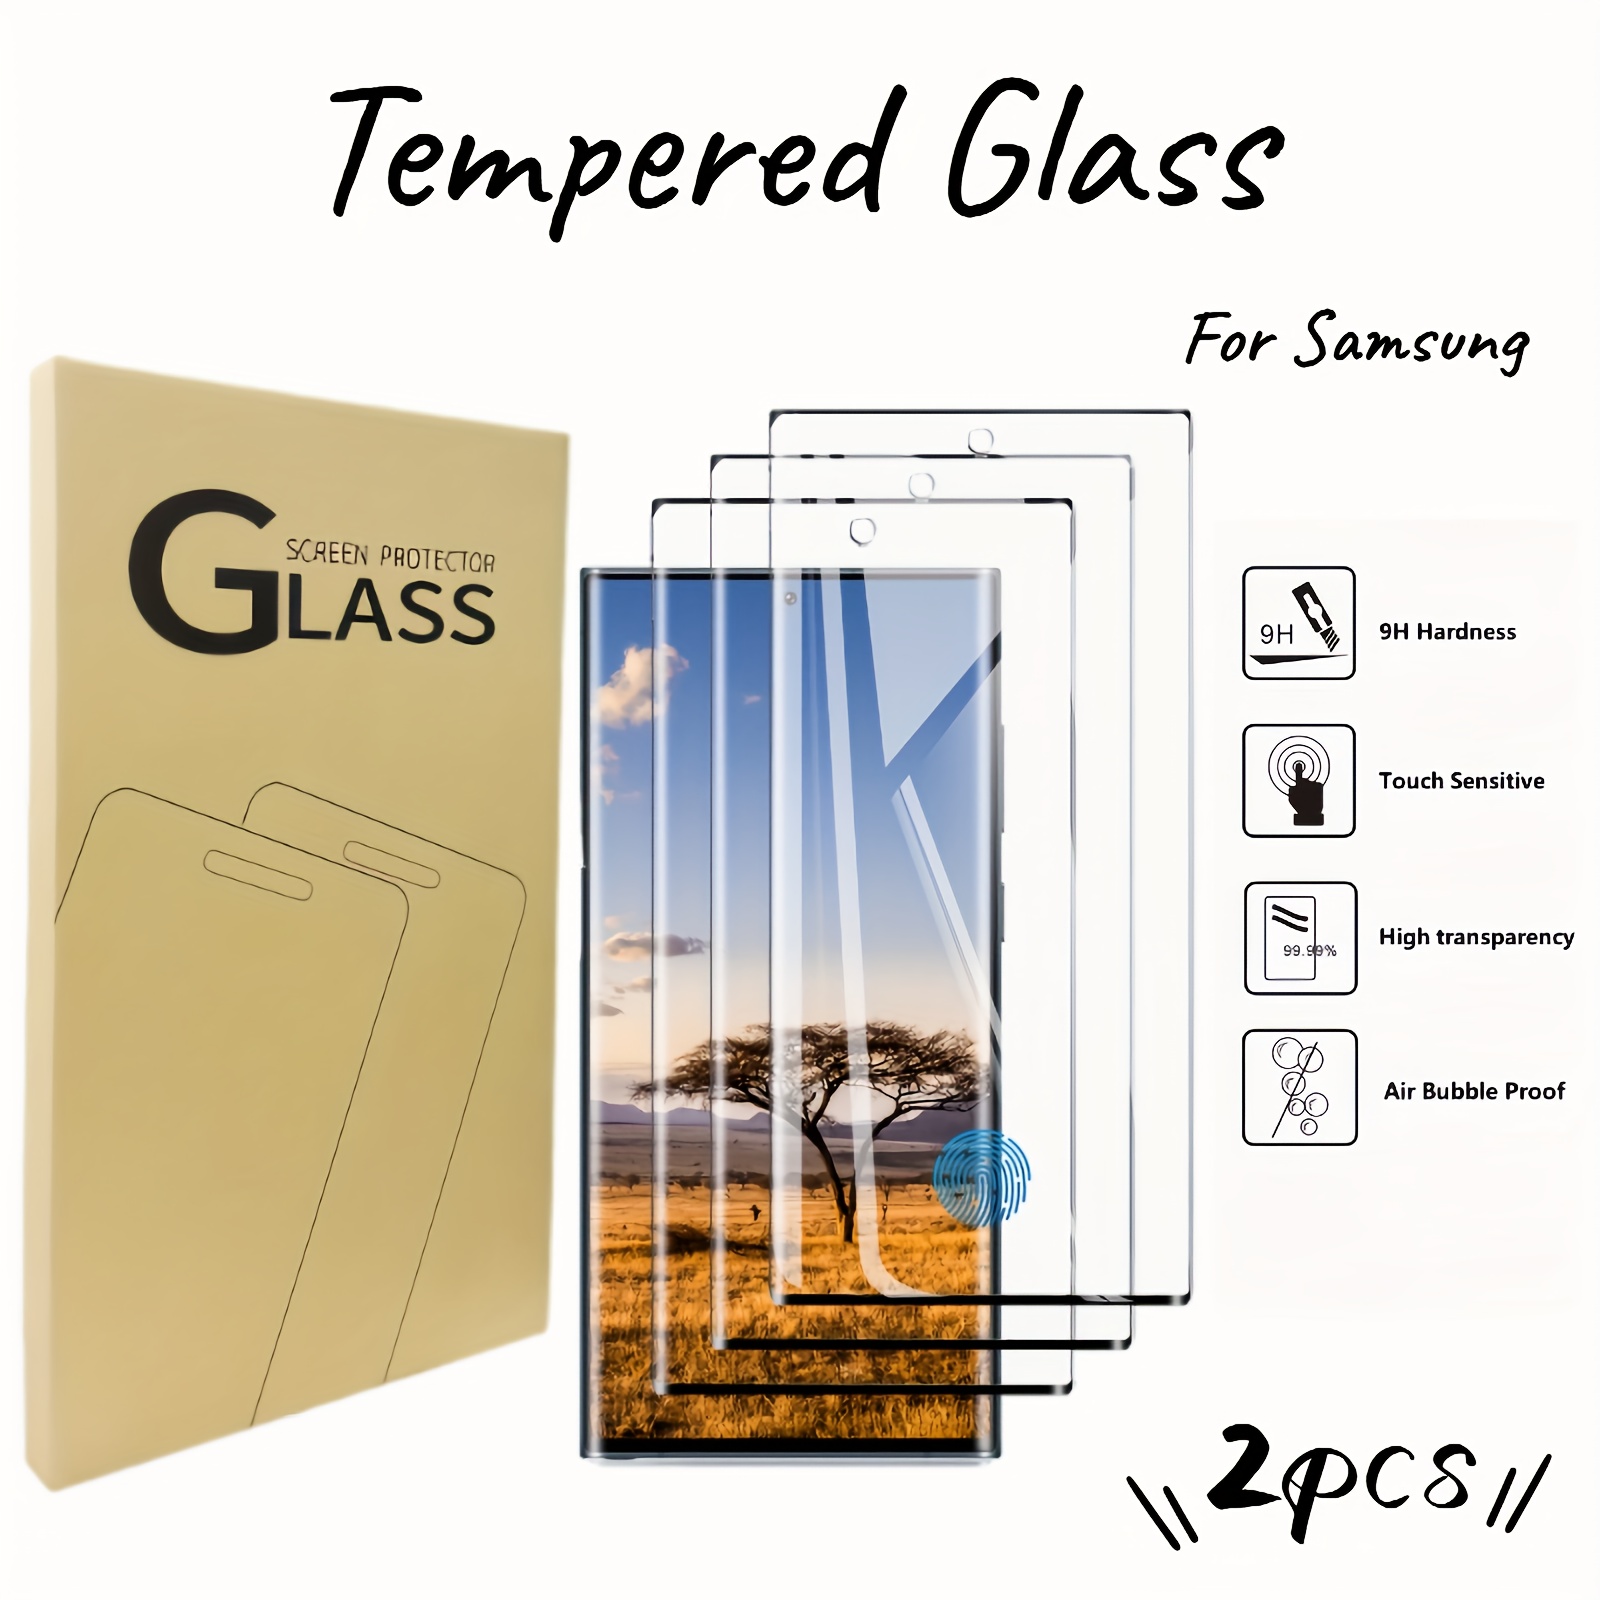 

2-piece Hd Clear Tempered Glass Screen Protector For Samsung S22/s23 Series - Fingerprint Unlock Compatible, 3d Curved, Scratch Resistant, Bubble-free Installation